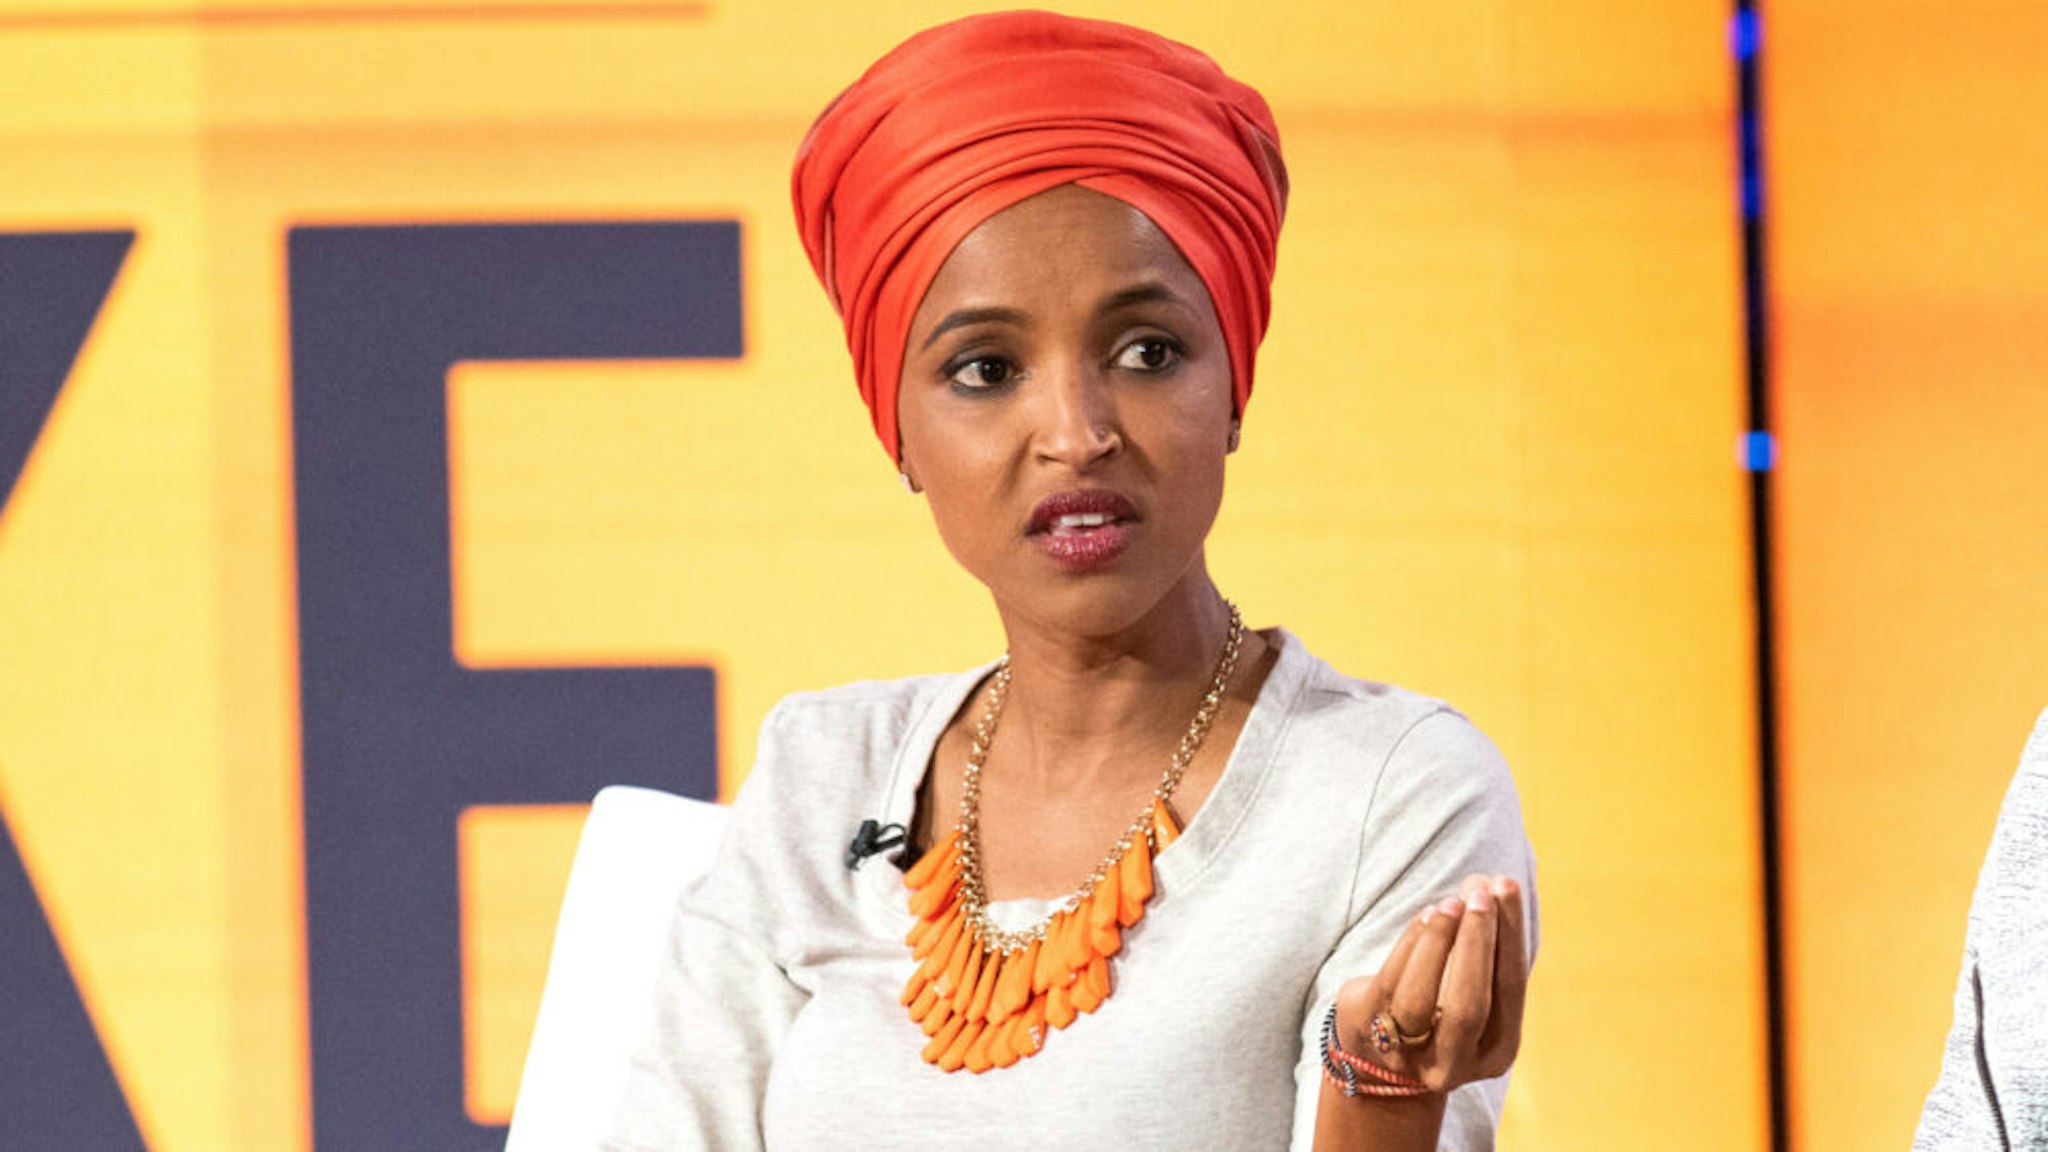 WASHINGTON, DC - SEPTEMBER 10: Congresswoman Ilhan Omar and Washington Post Reporter Danielle Douglas-Gabriel during BET News presents an Angela Rye Special " Young Gifted and Broke: Our Student Loan Crisis" at Howard Theater on September 10, 2019 in Washington, DC.